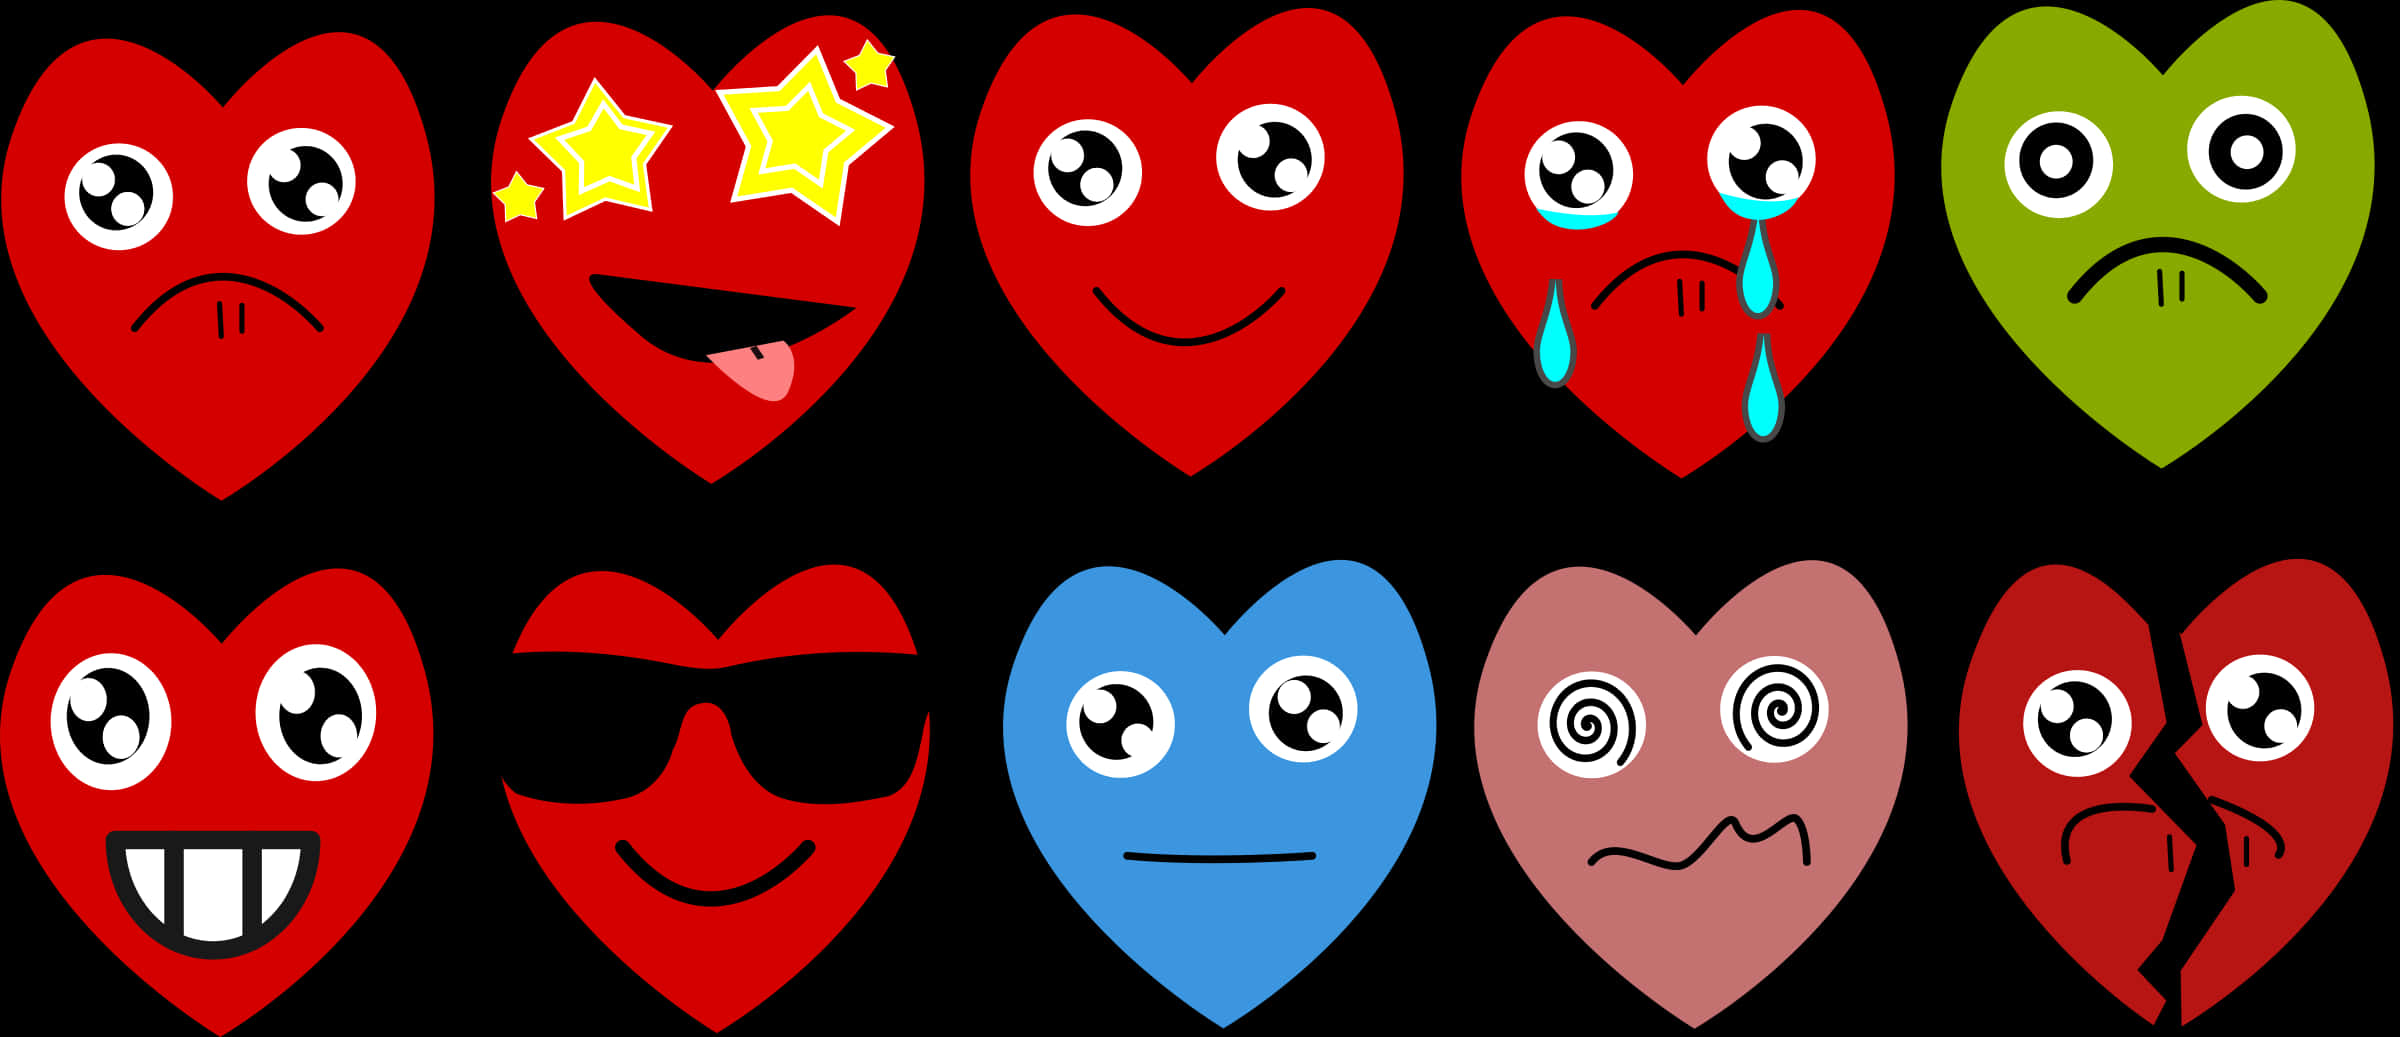 Heart Emojis With Faces